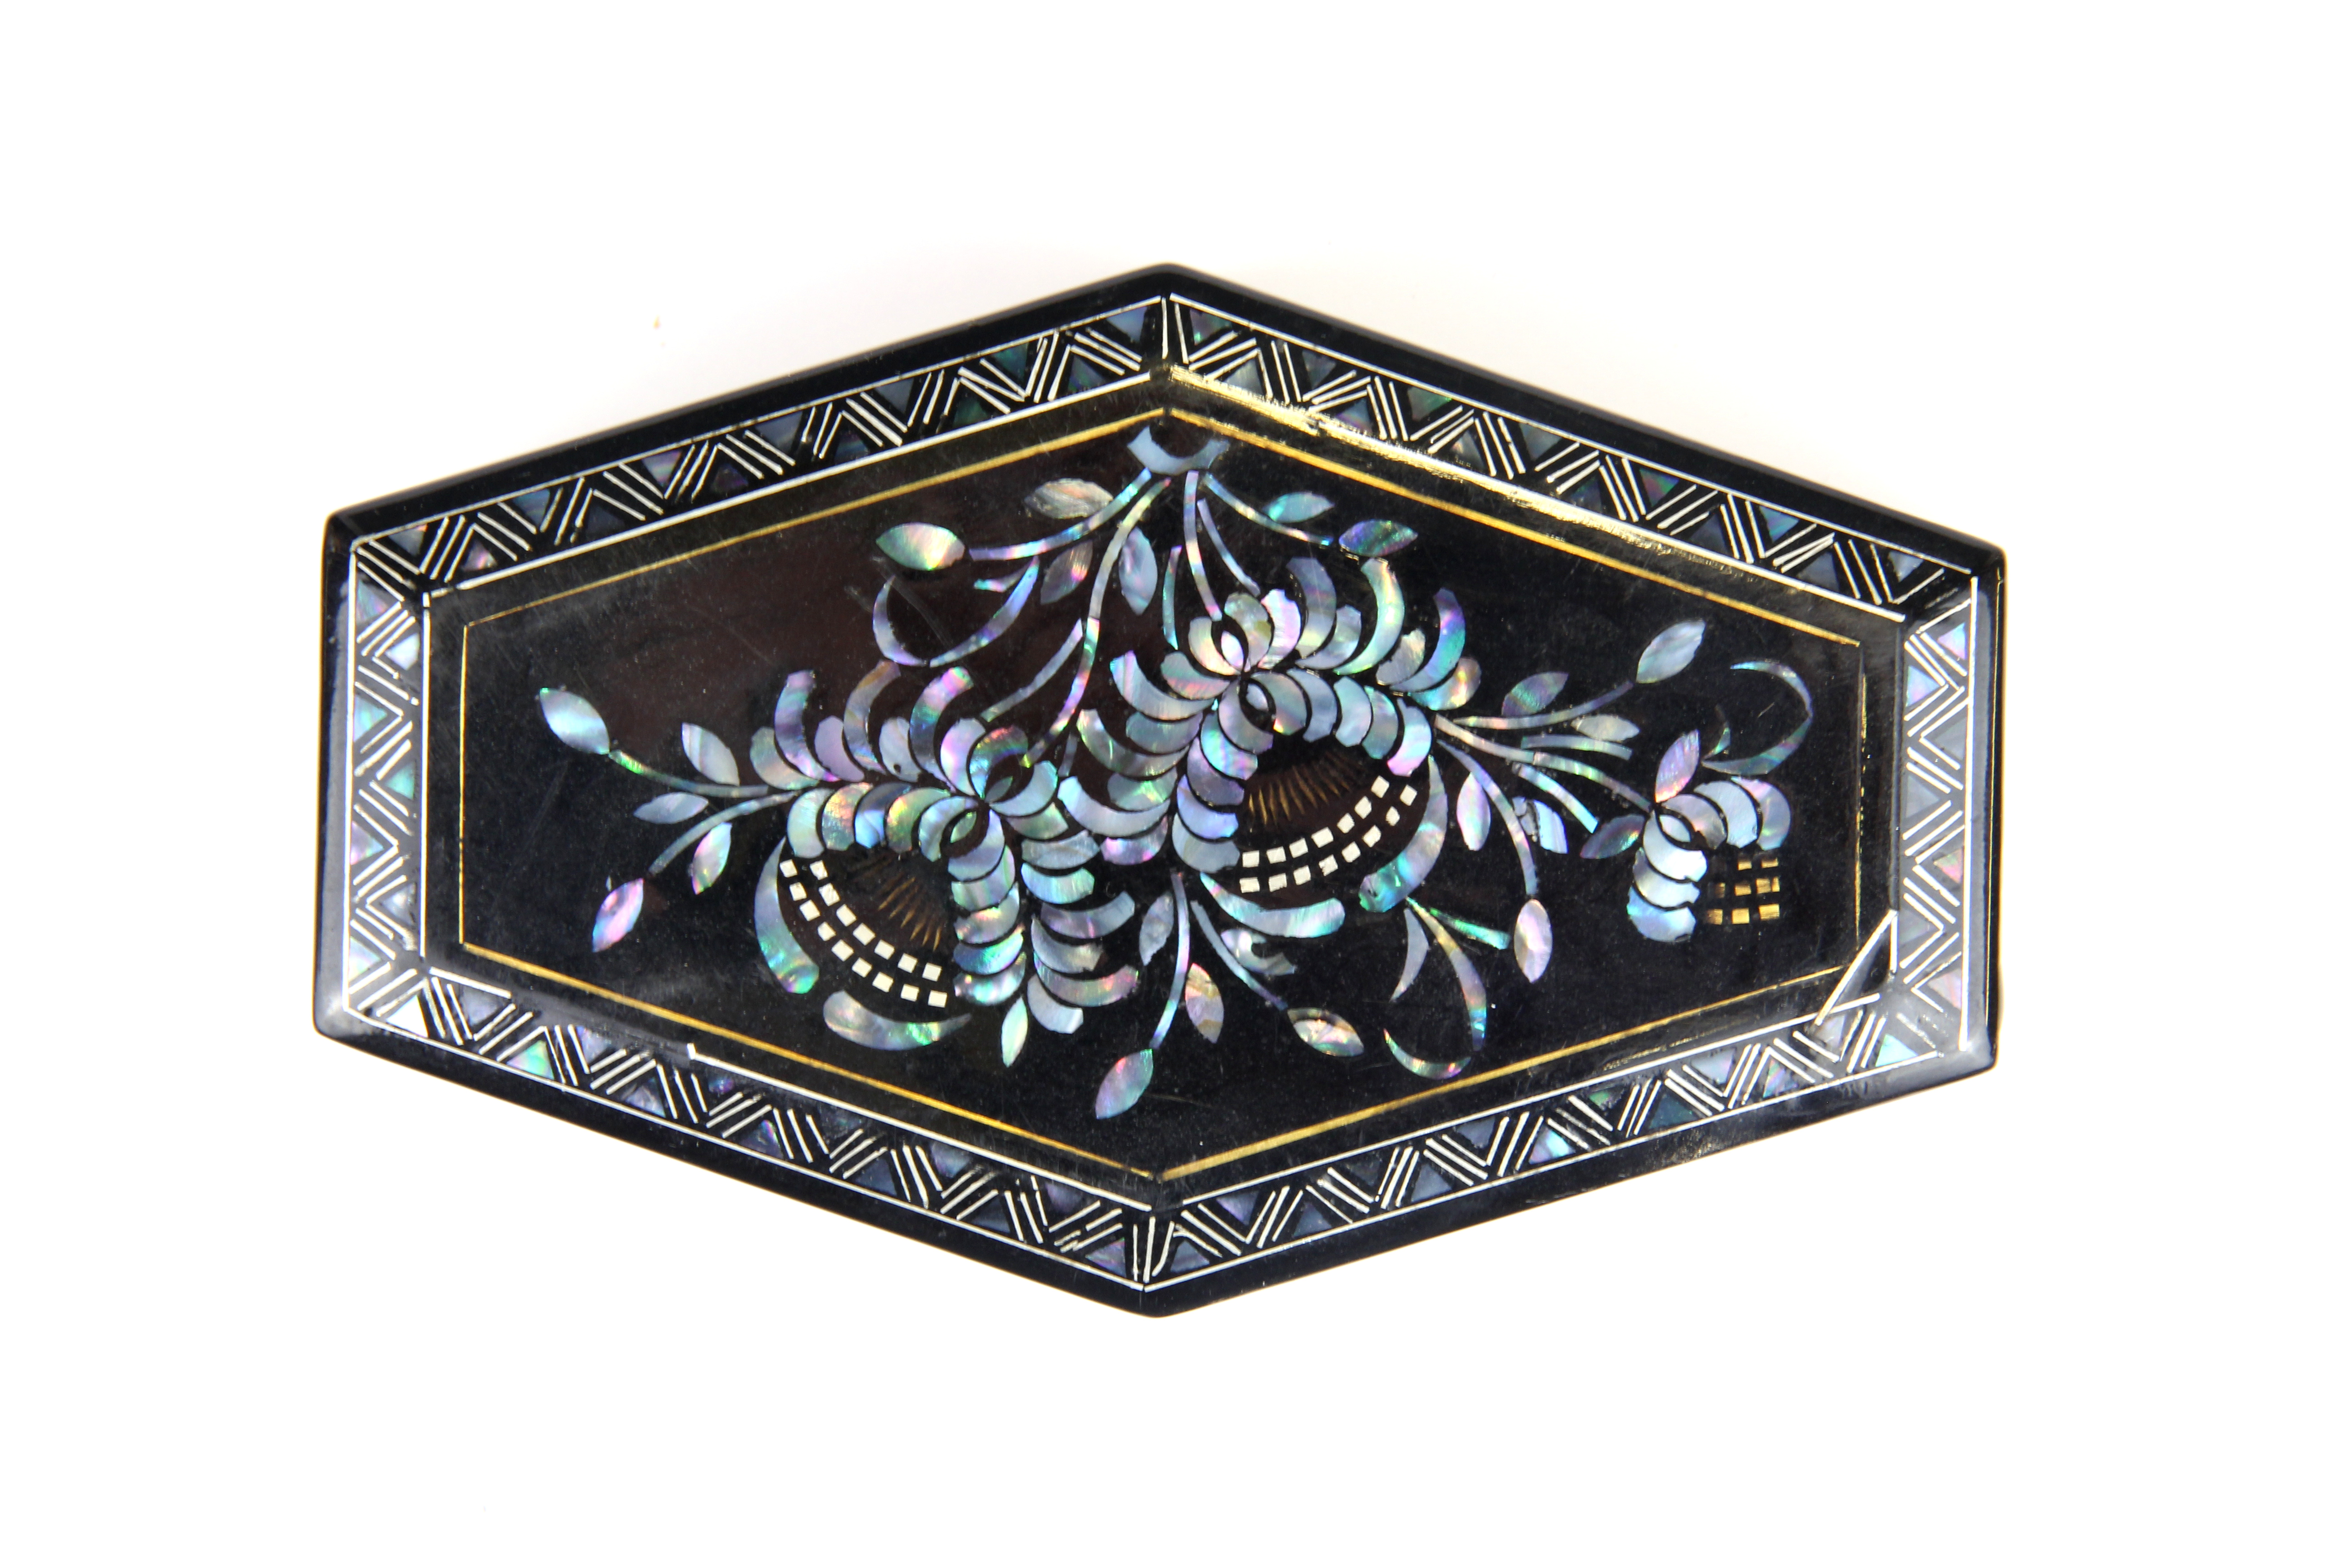 A Chinese lacquer box with Mother of Pearl decoration, L. 13cm. H. 5.5cm. - Image 2 of 4